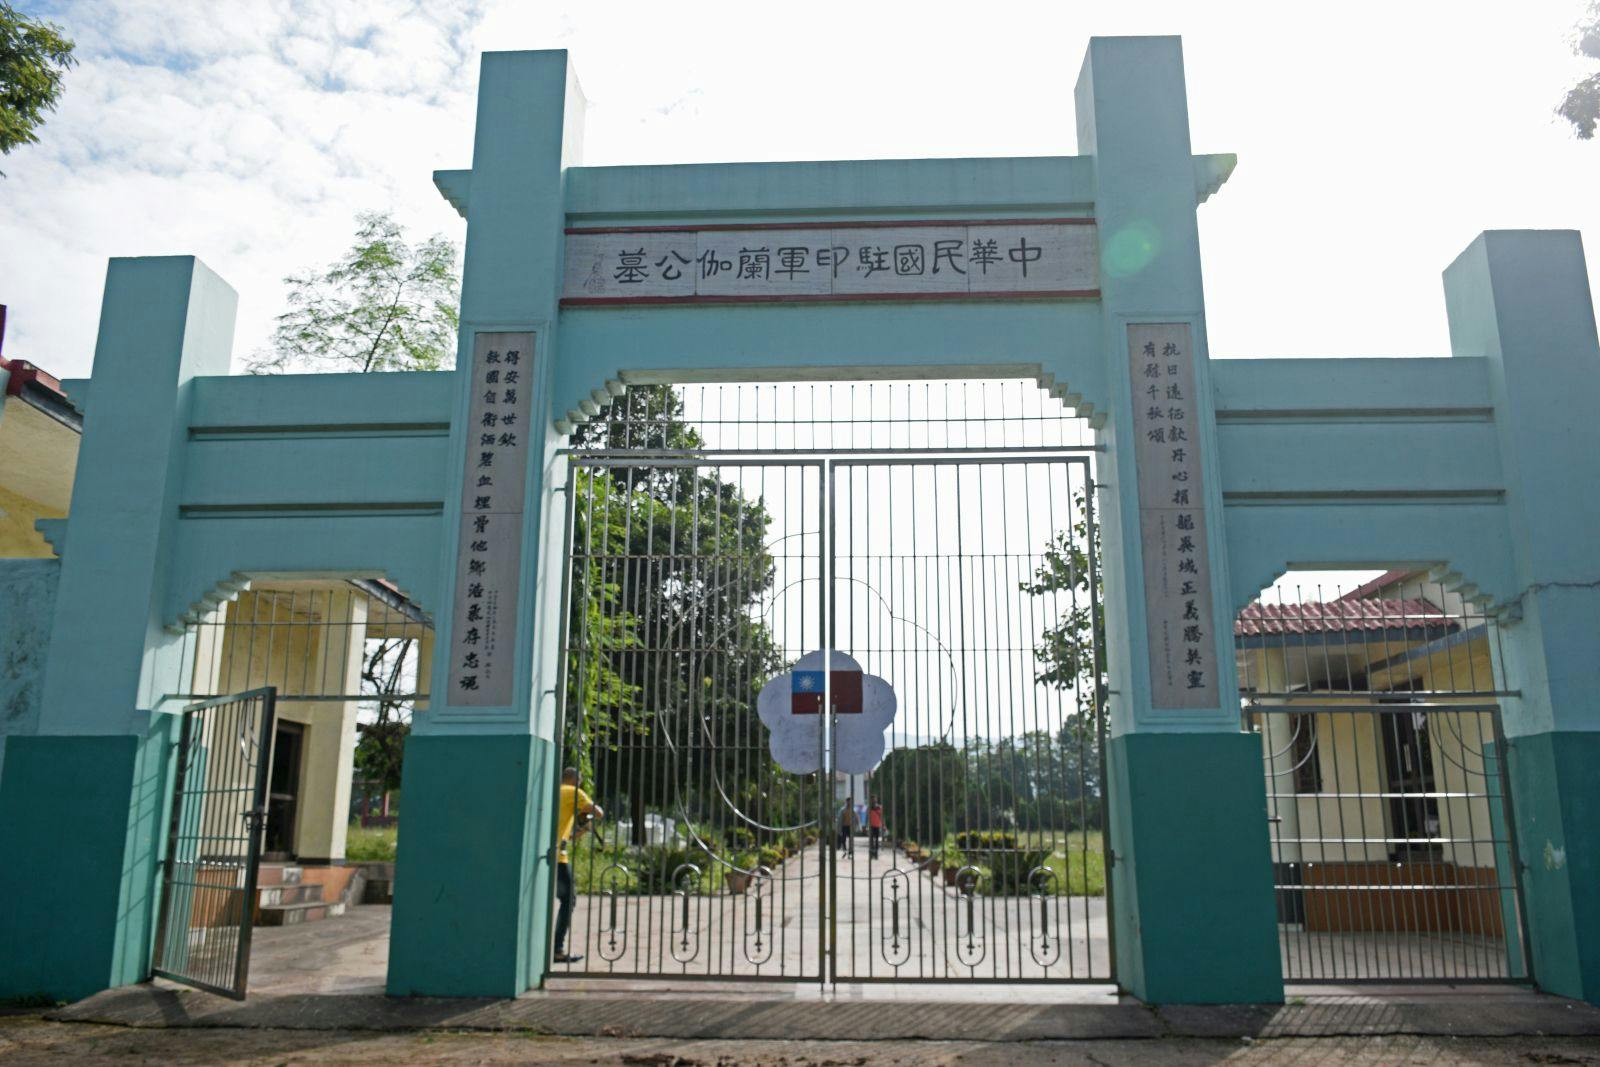 Gate to the Chinese cemetery